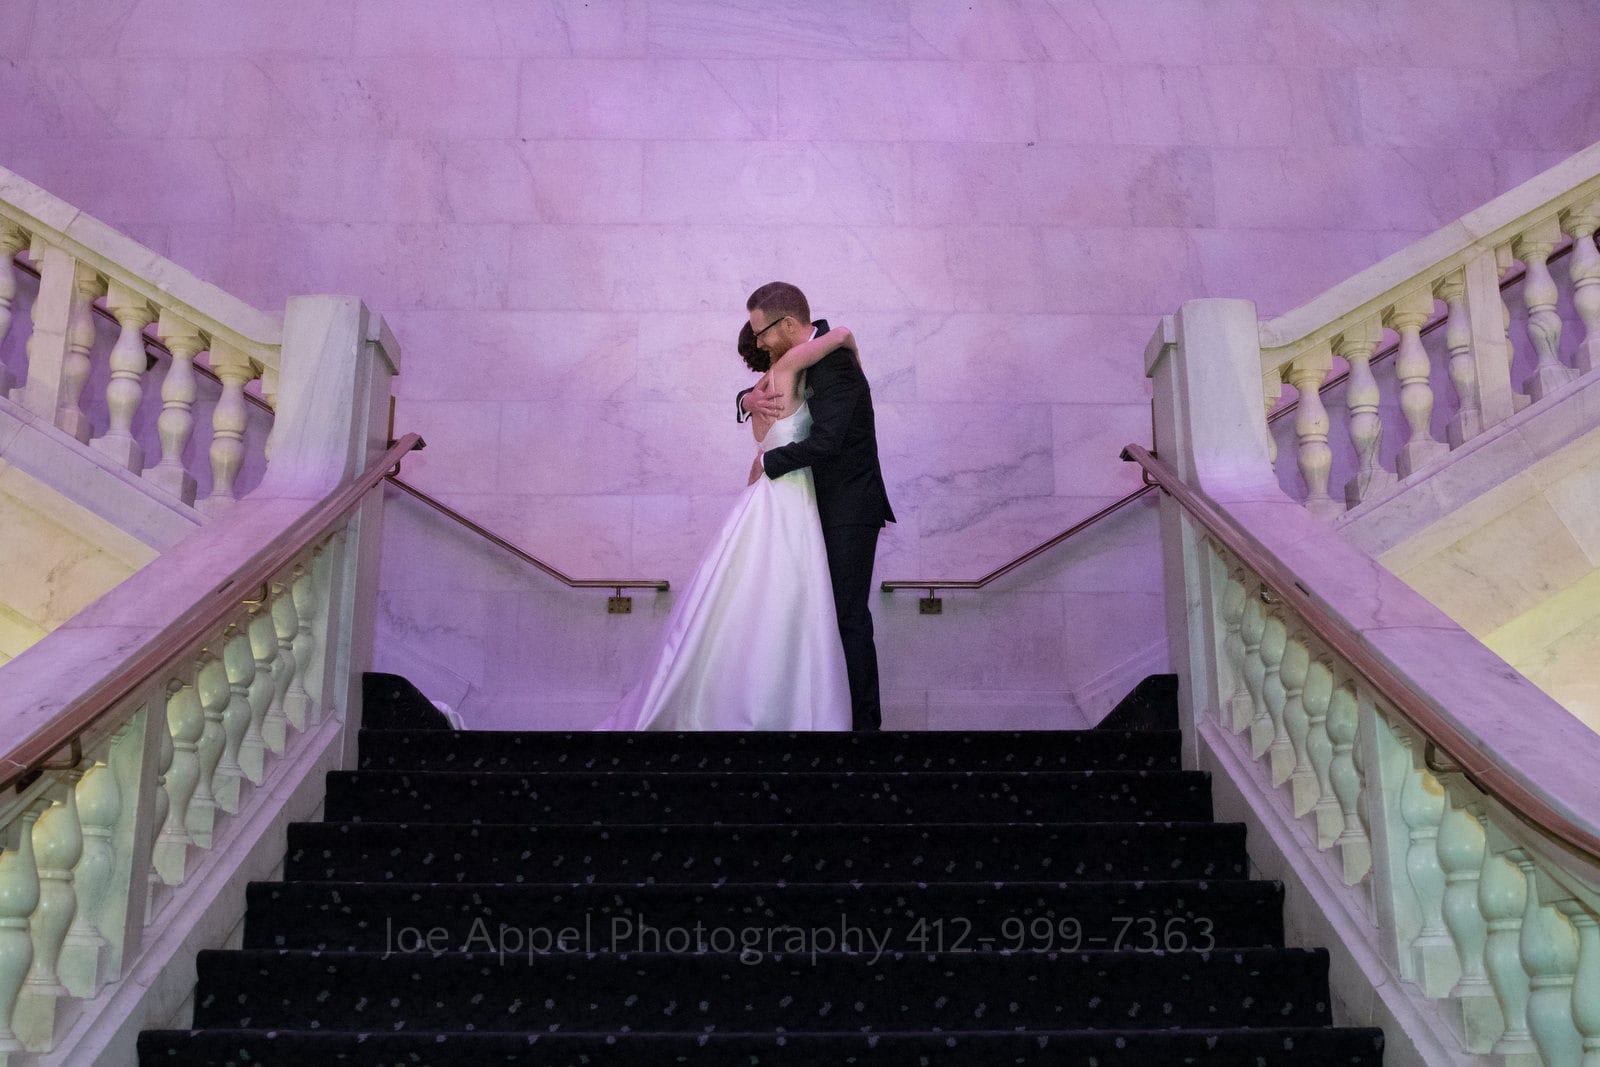 A bride and groom embrace on the landing of the grand white marble staircase at the Renaissance Hotel in Pittsburgh. Purple light reflects from the white surfaces.